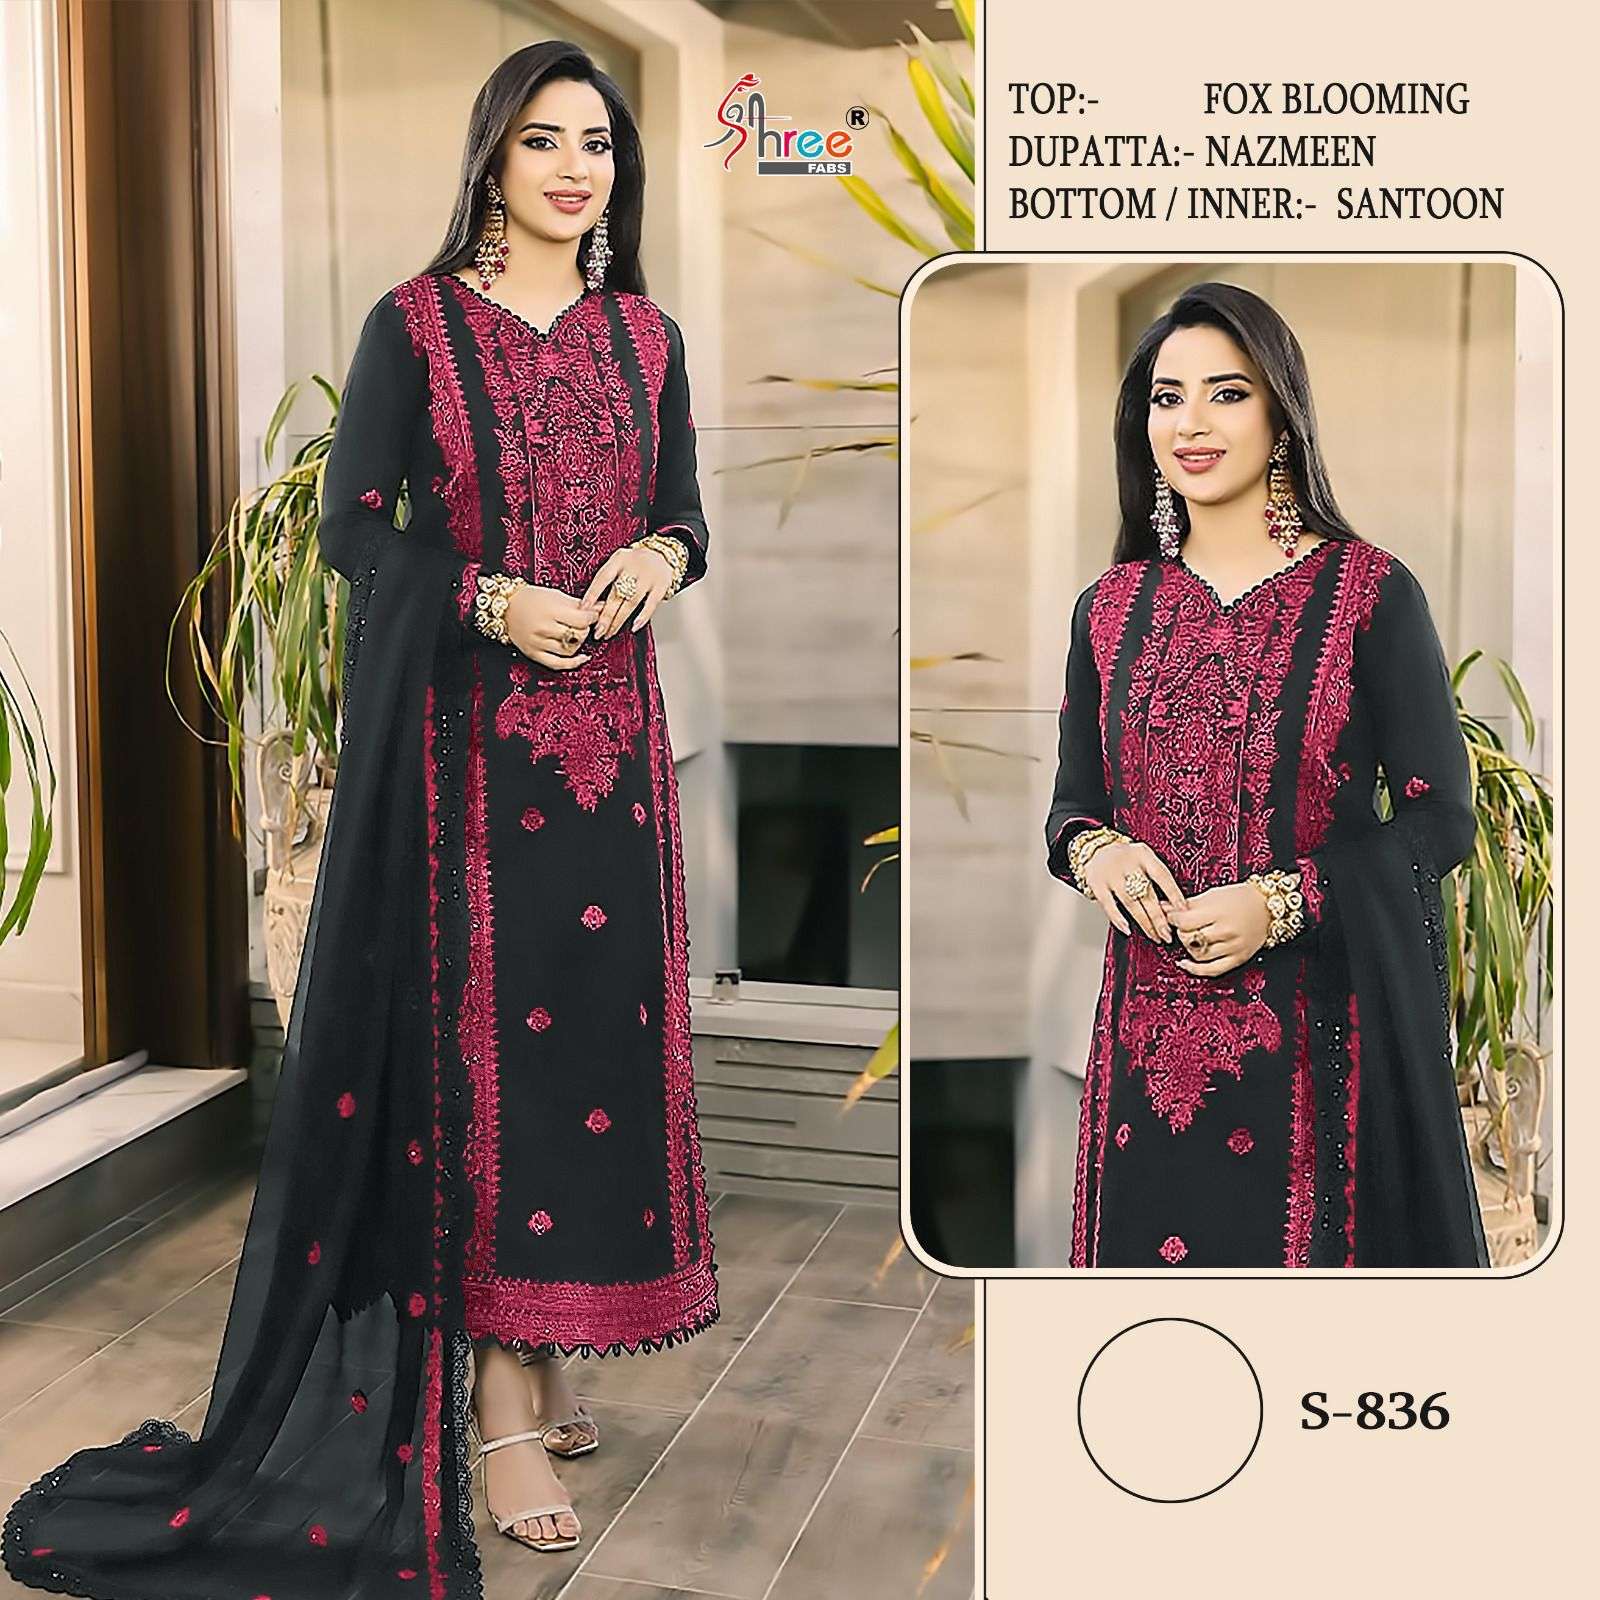 S-836 HIT DESIGN BY SHREE FABS HEAVY GEORGETTE EMBROIDERY PAKISTANI DRESSES